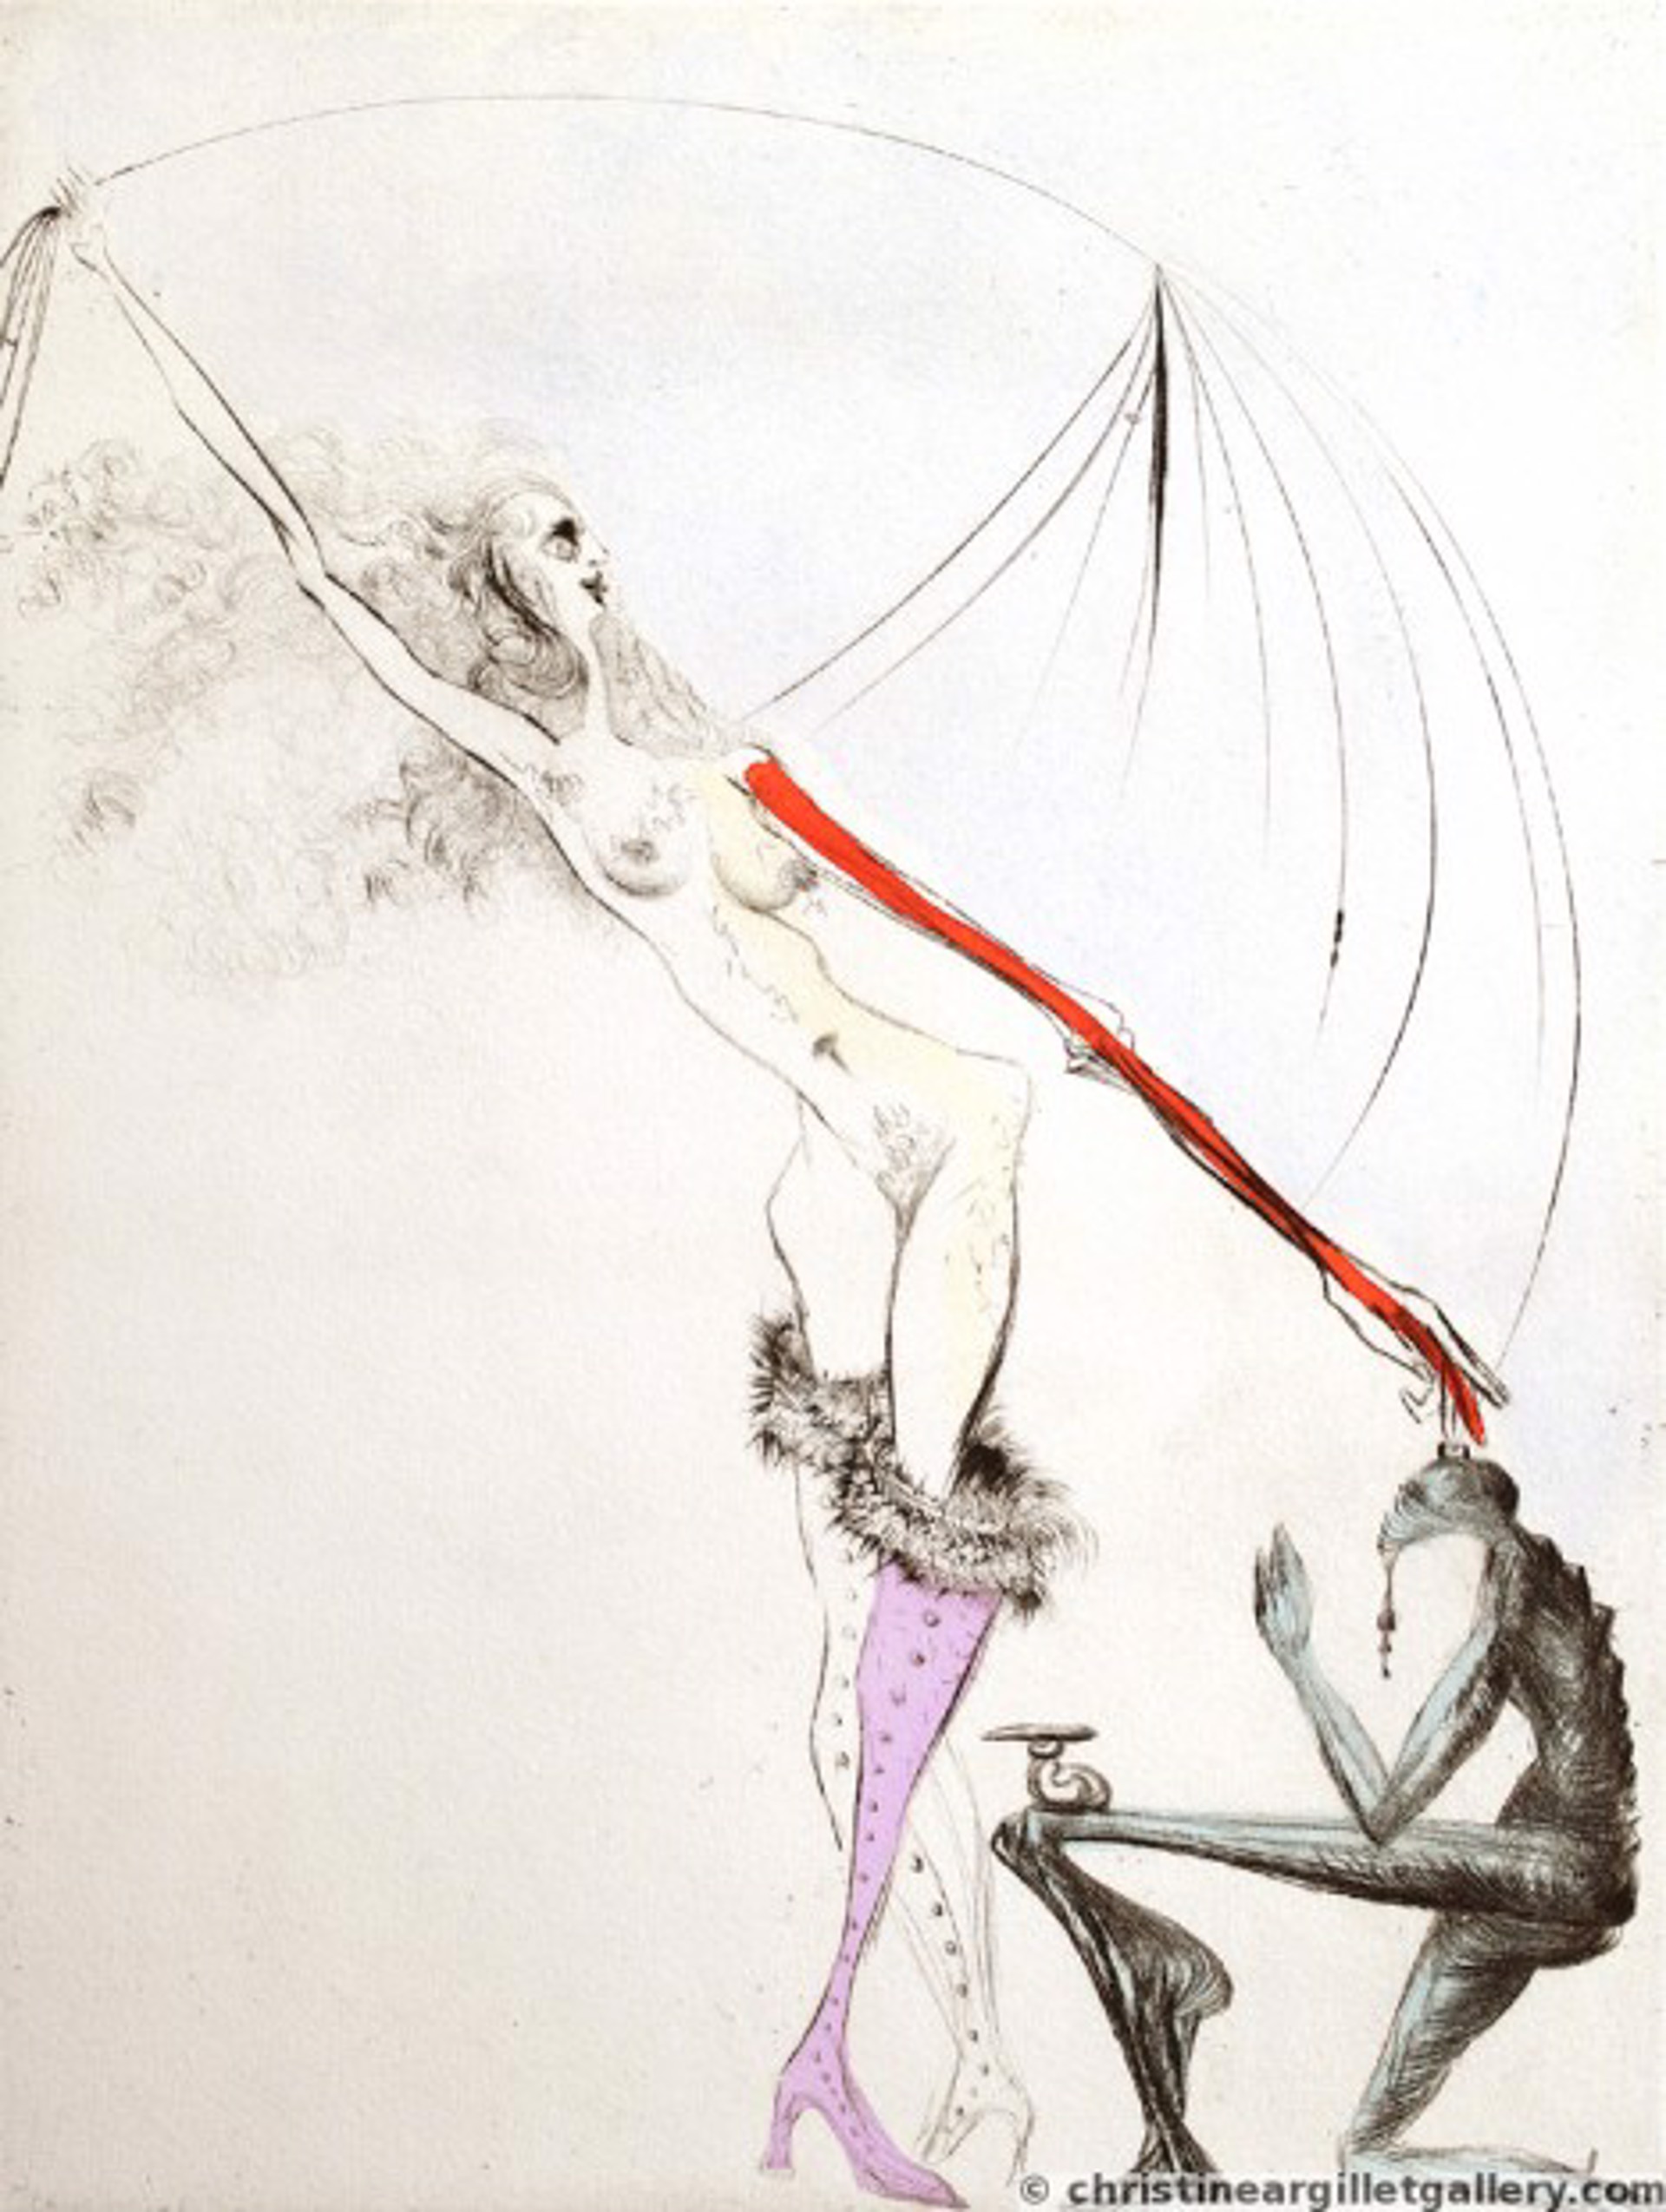 Venus in Furs“The Purple Boot“ by Salvador Dalí